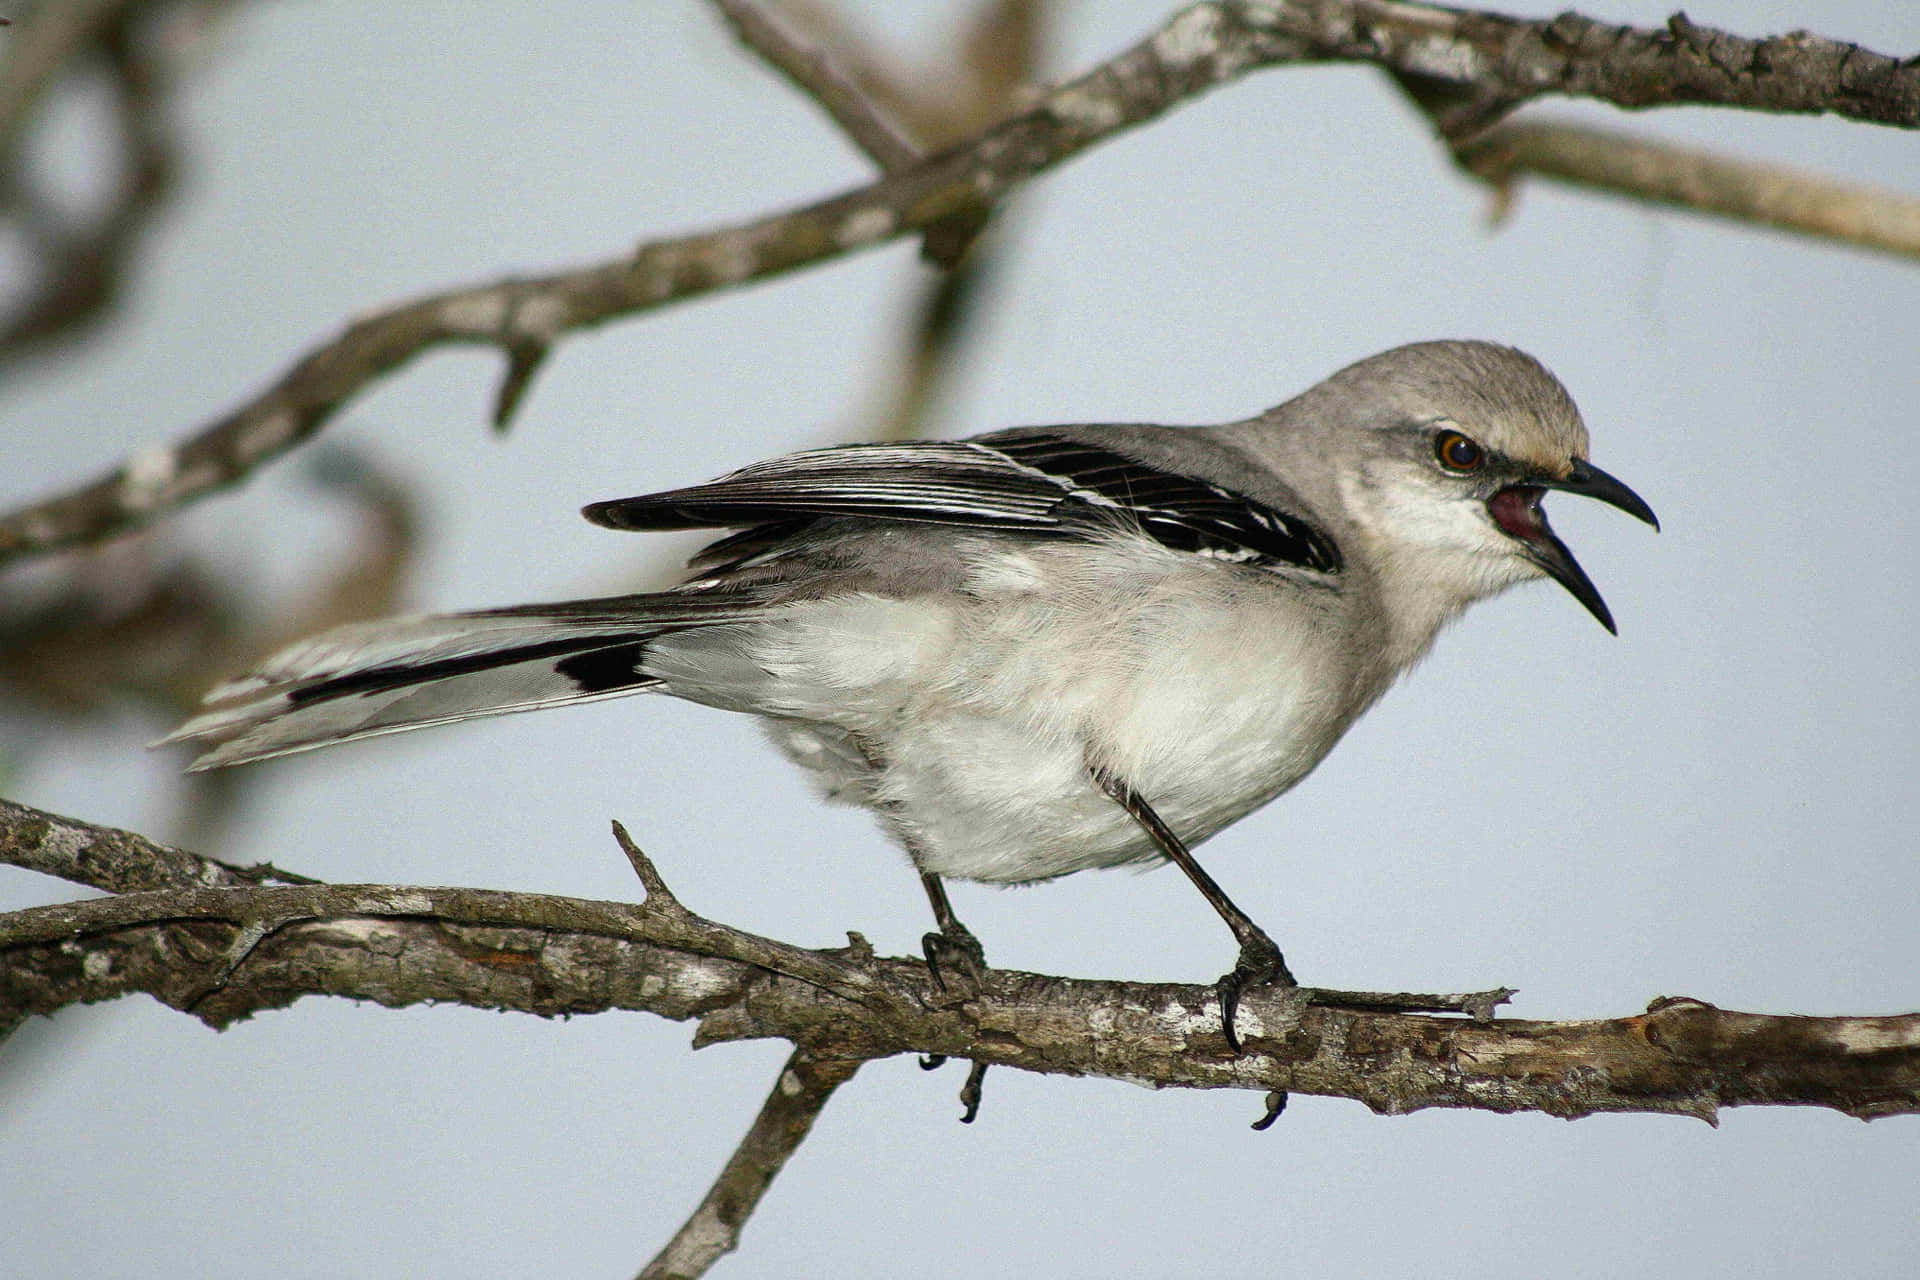 A Mockingbird perched atop a flowering bush in all its glory.